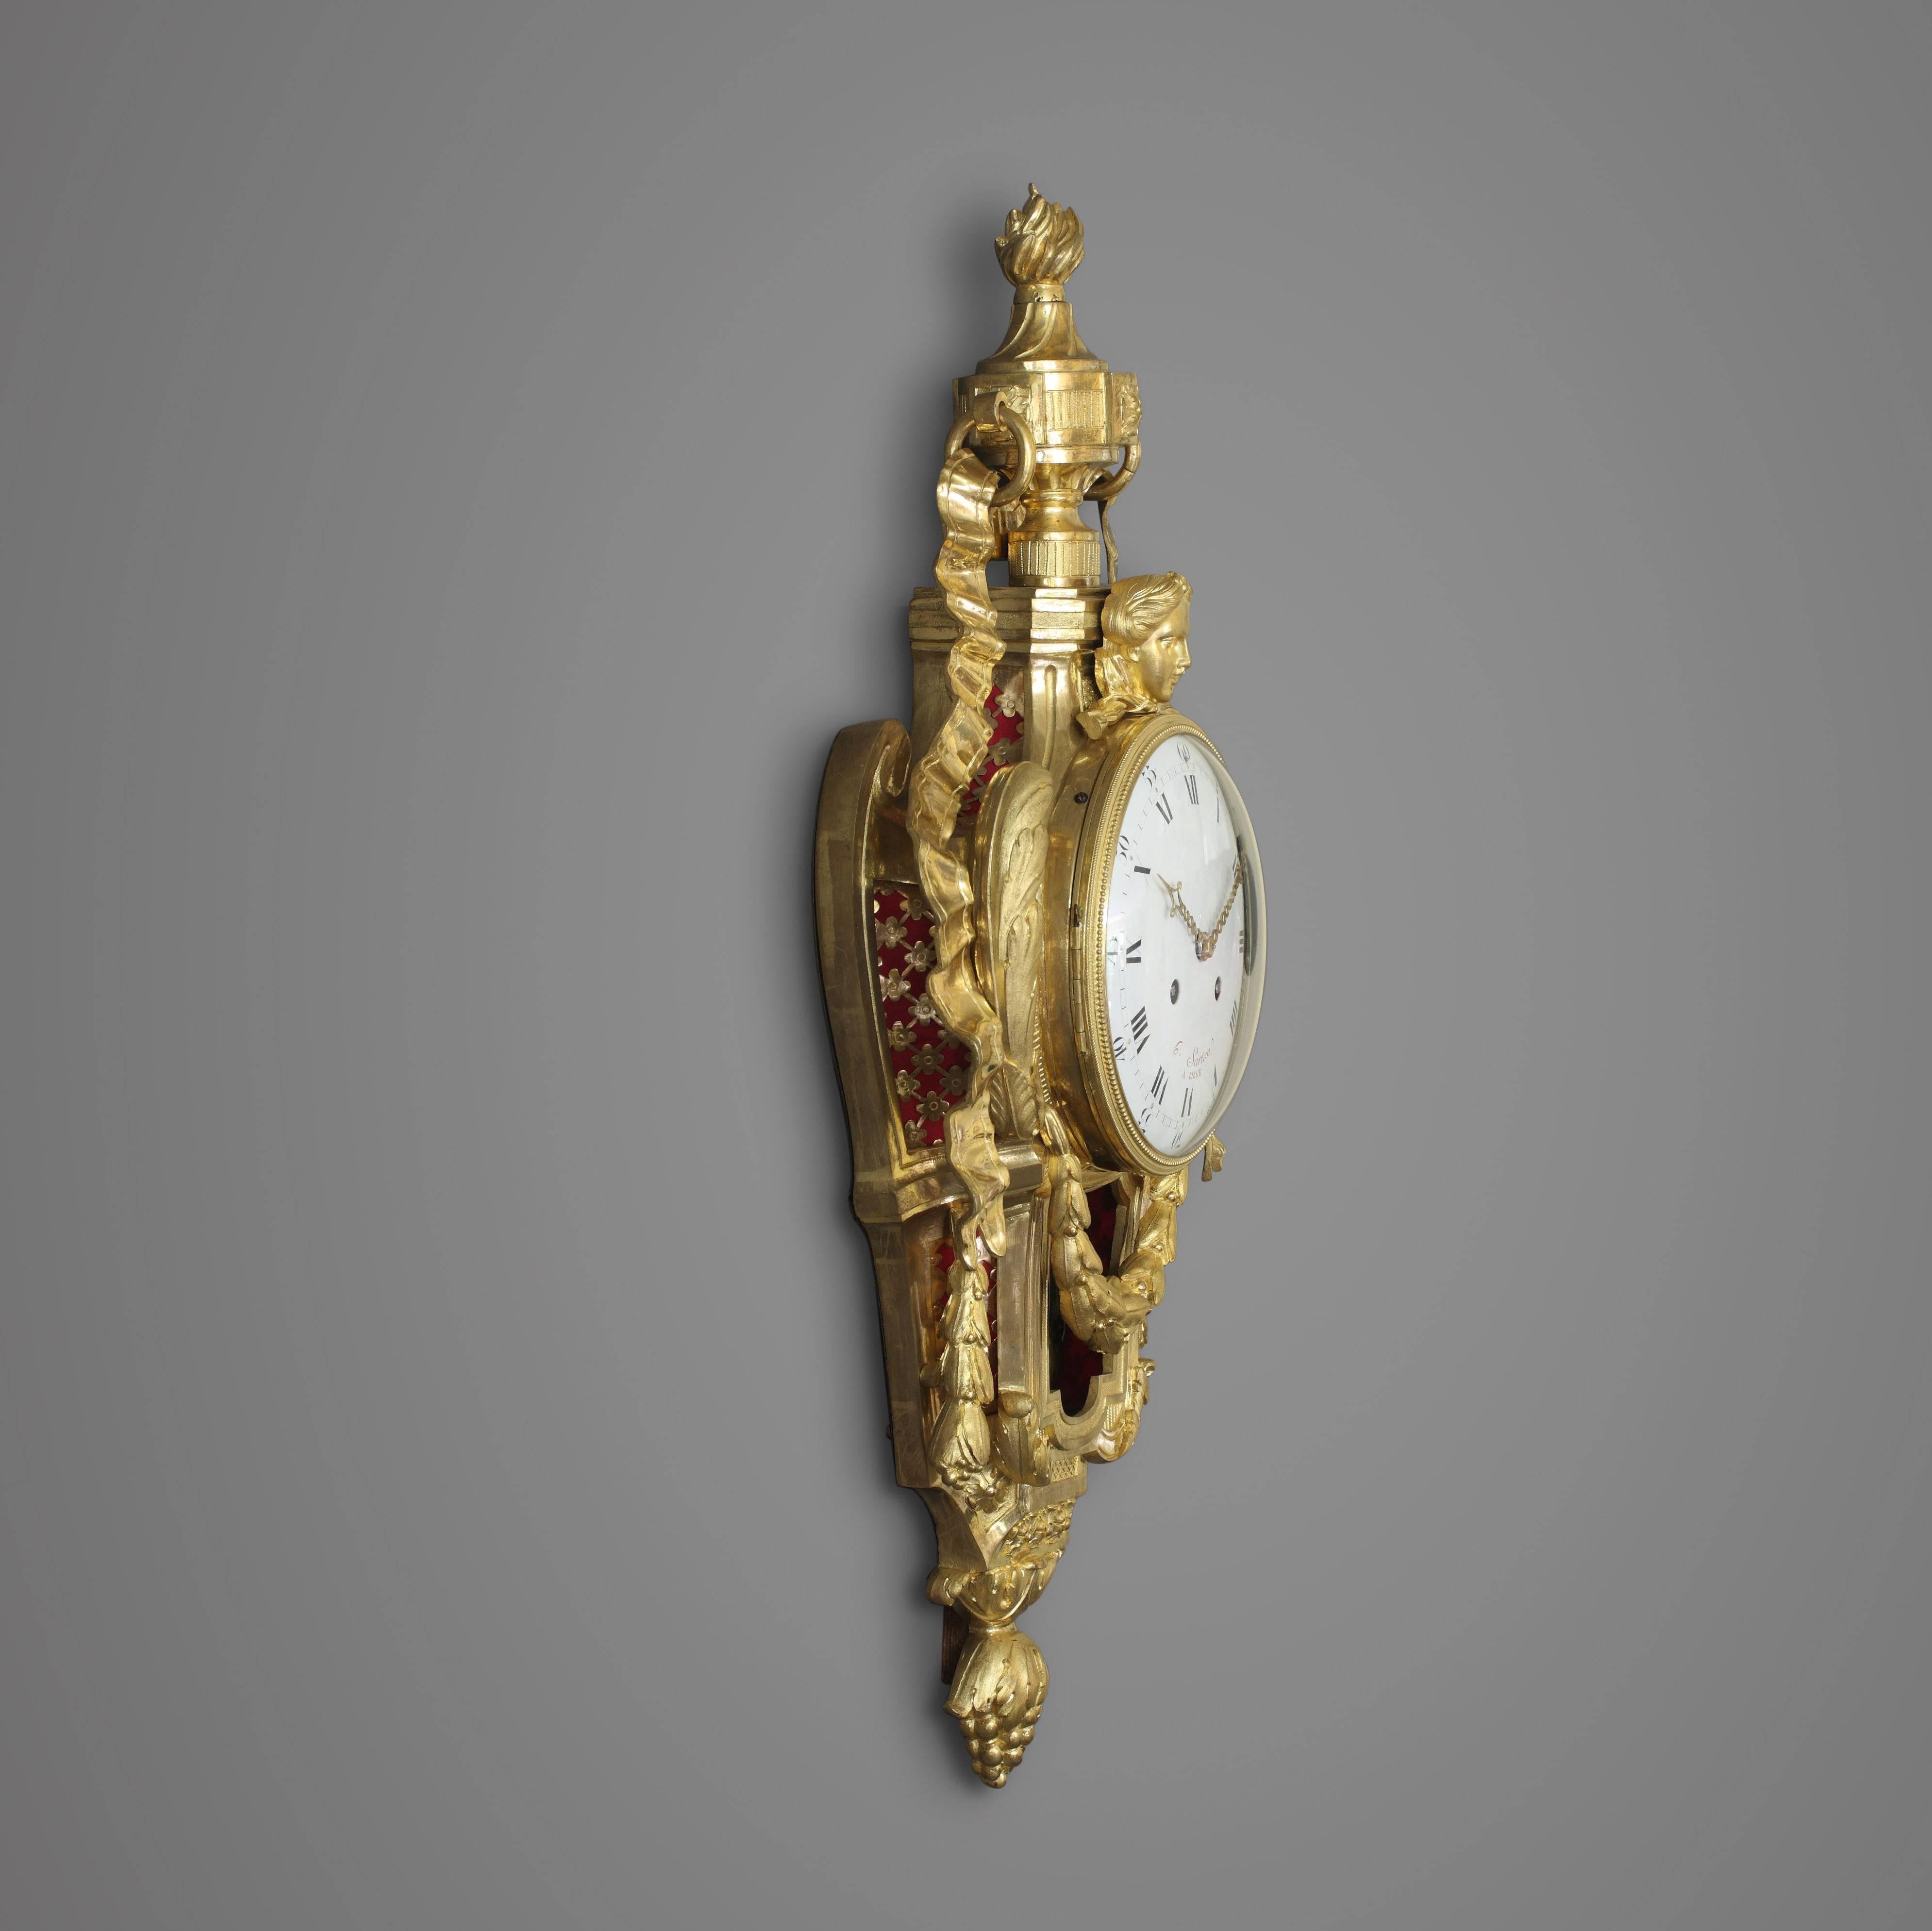 Sarton à Liège(1748-1828)
French wall cartel “Mask of Apollo”, from a model by Osmond
Ormolu, Louis XVI-period, circa 1785. Two-train movement, with anchor recoil escapement of the tic-tac type and silk-suspended pendulum. Half-hourly strike on a